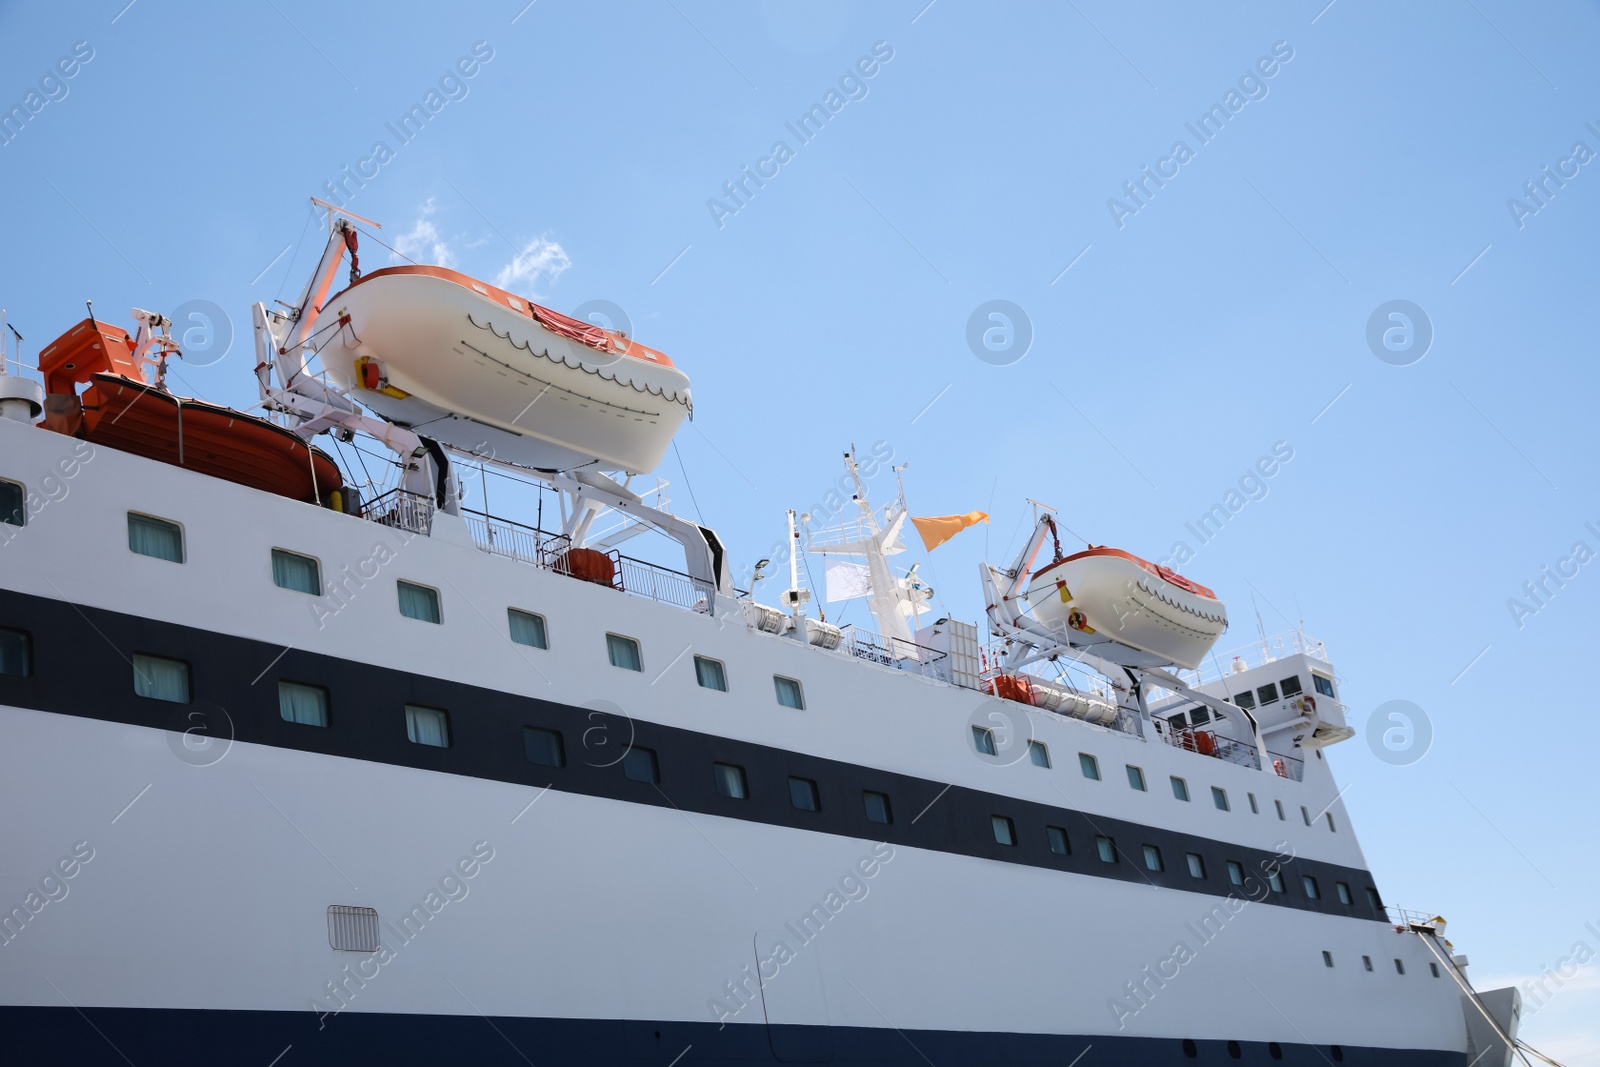 Photo of Modern ferry with lifeboats on sunny day, low angle view